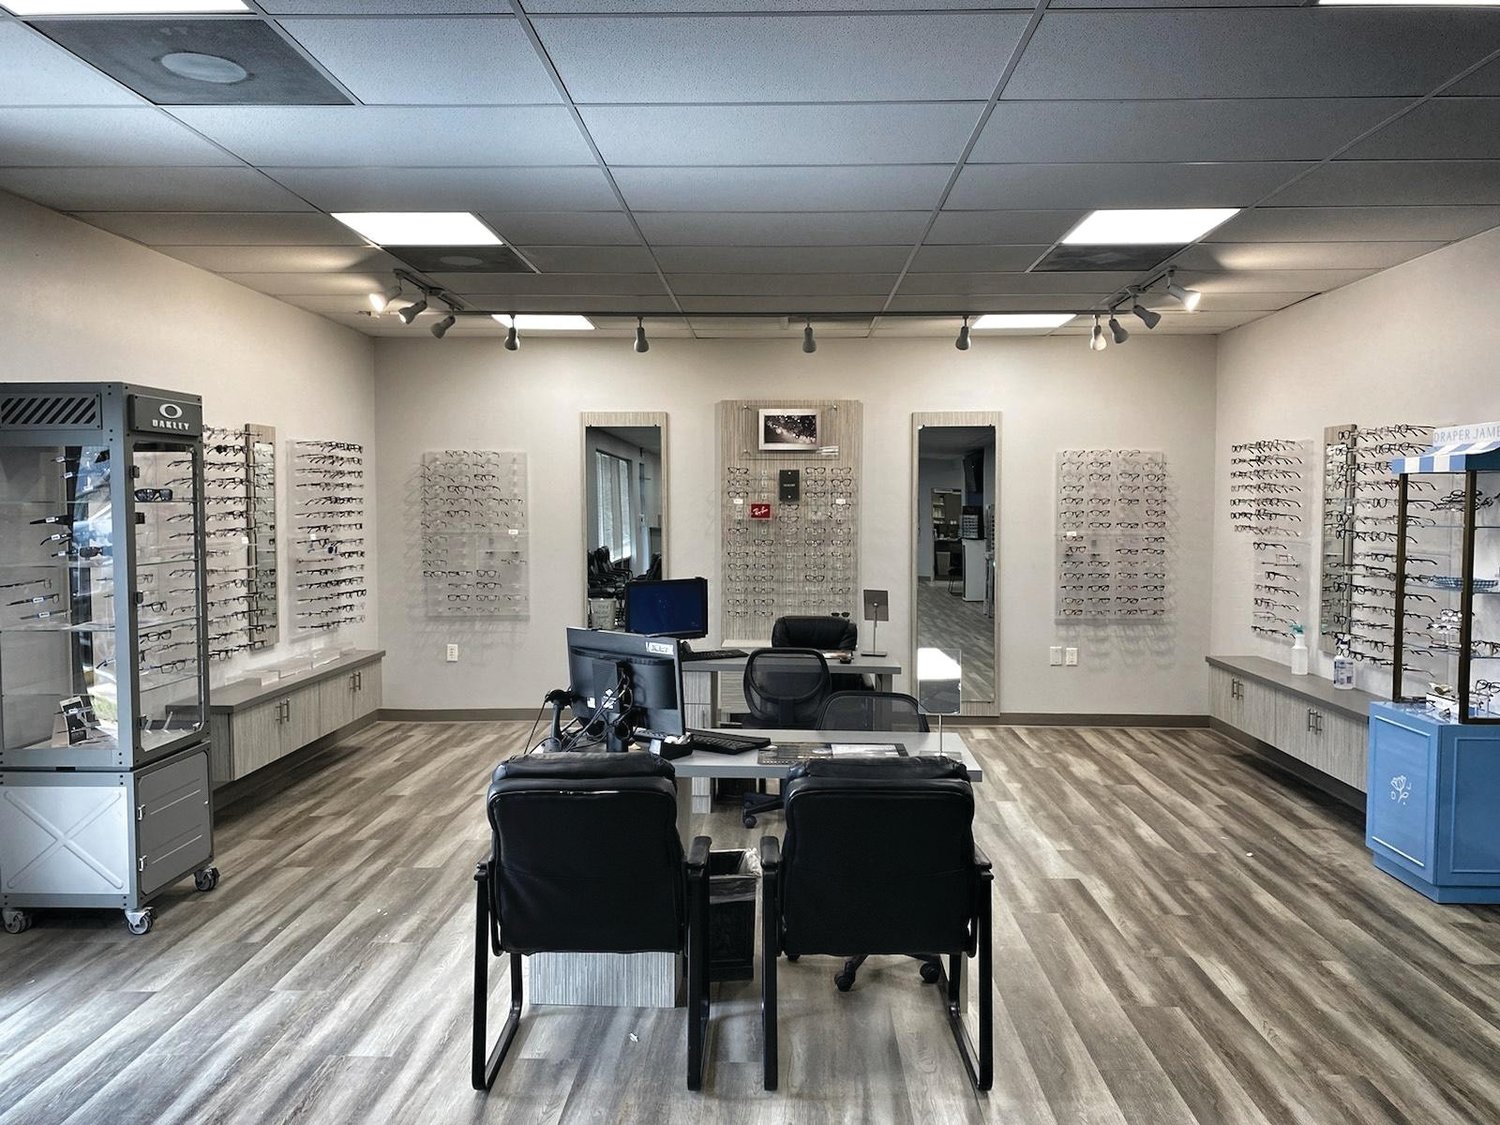 The Eye Centers of Florida Clewiston office located at 820 W. Sugarland Highway has been remodeled with modern finishes and a larger waiting area to better serve patients and practice social distancing.